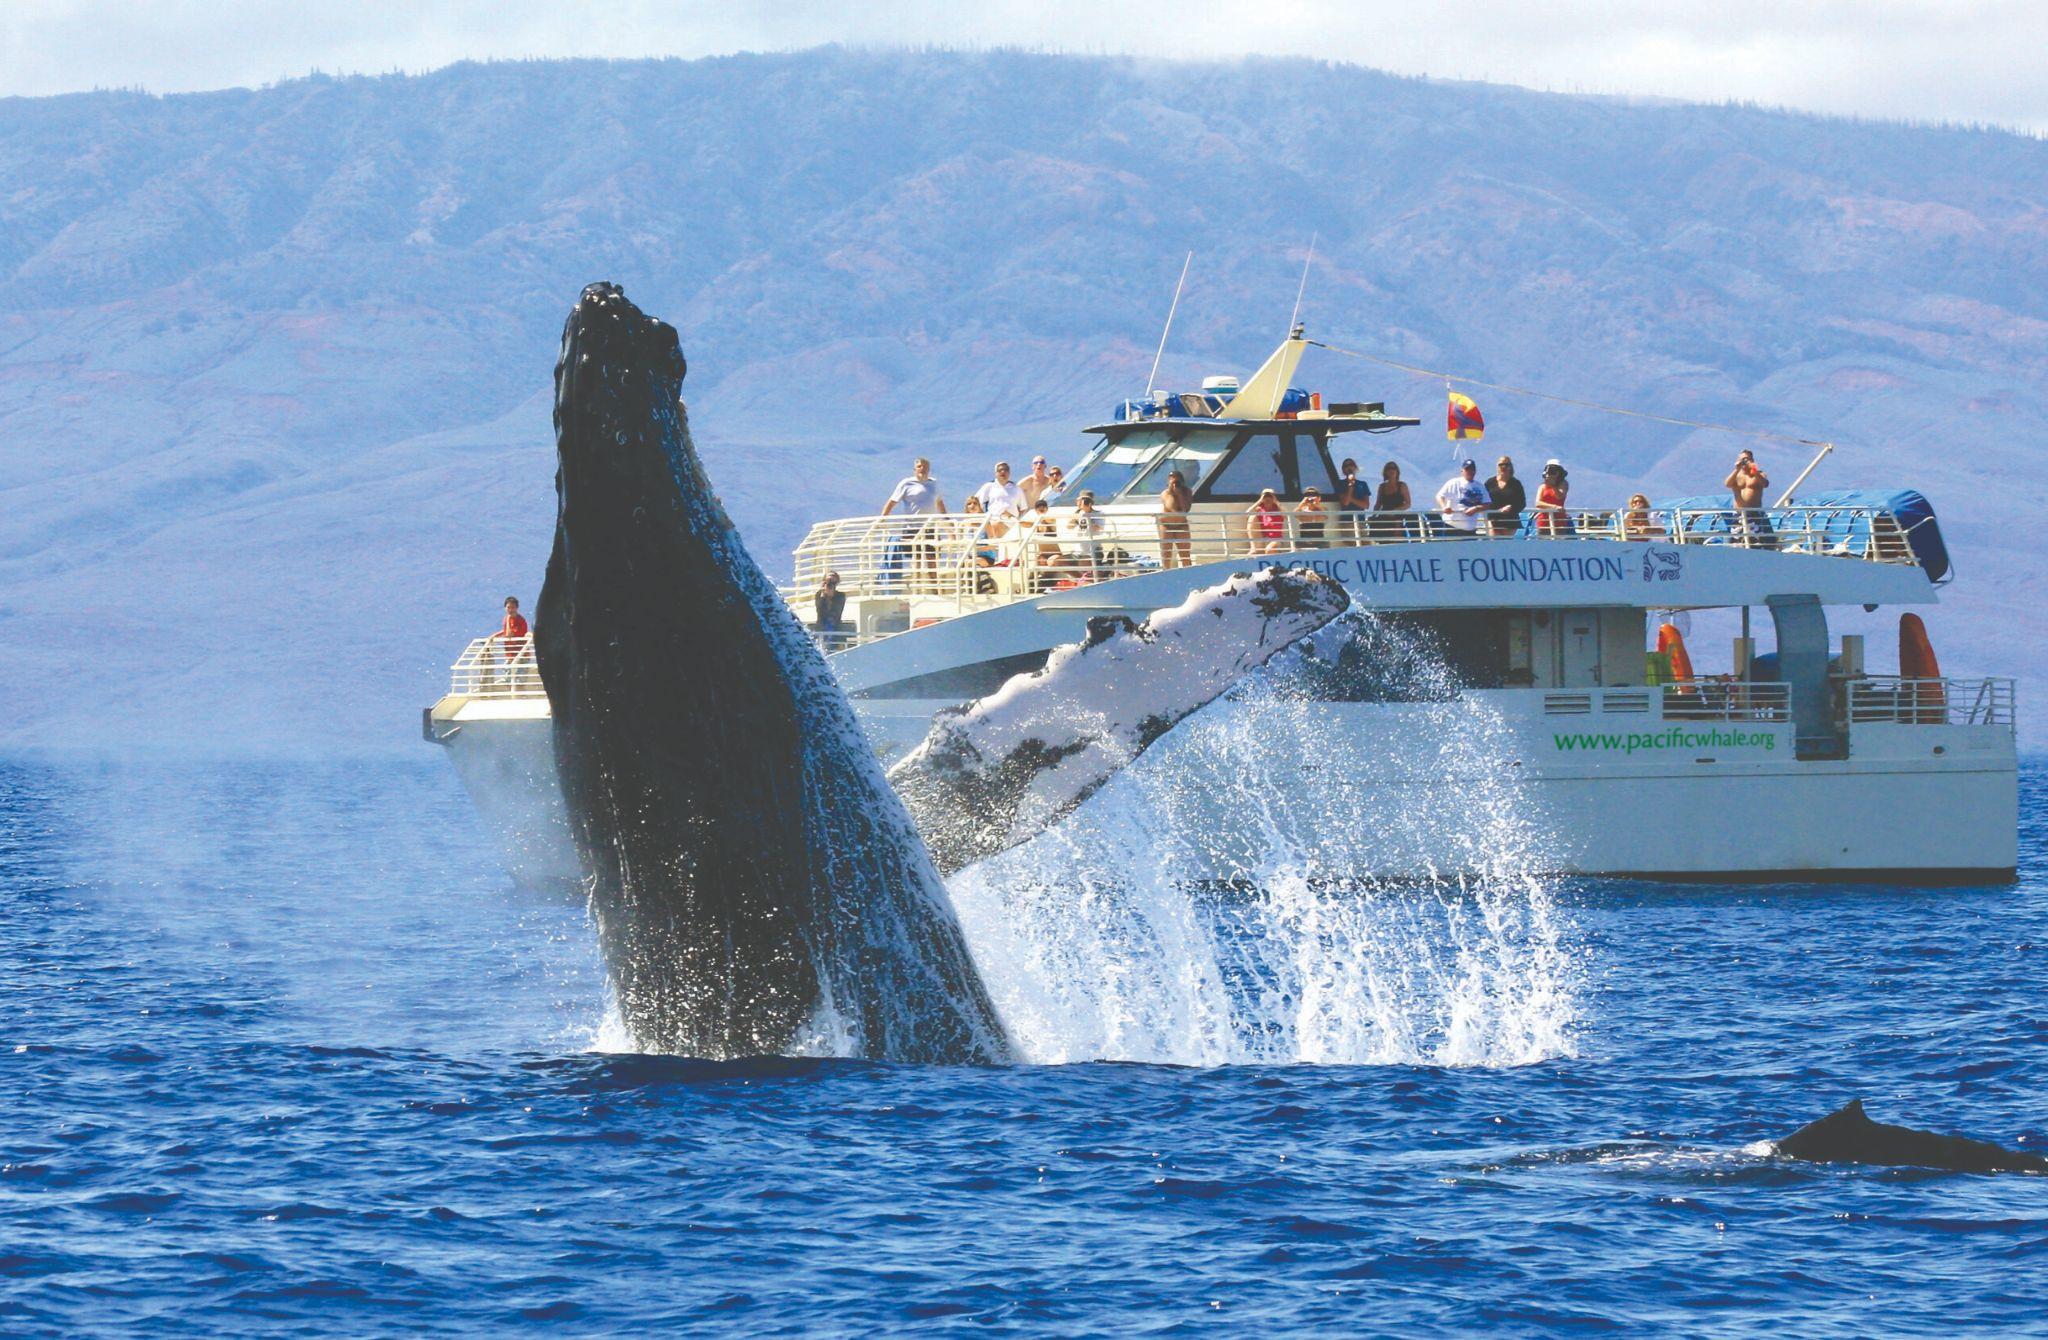 What To Look For When Choosing A Whale Watching Tour